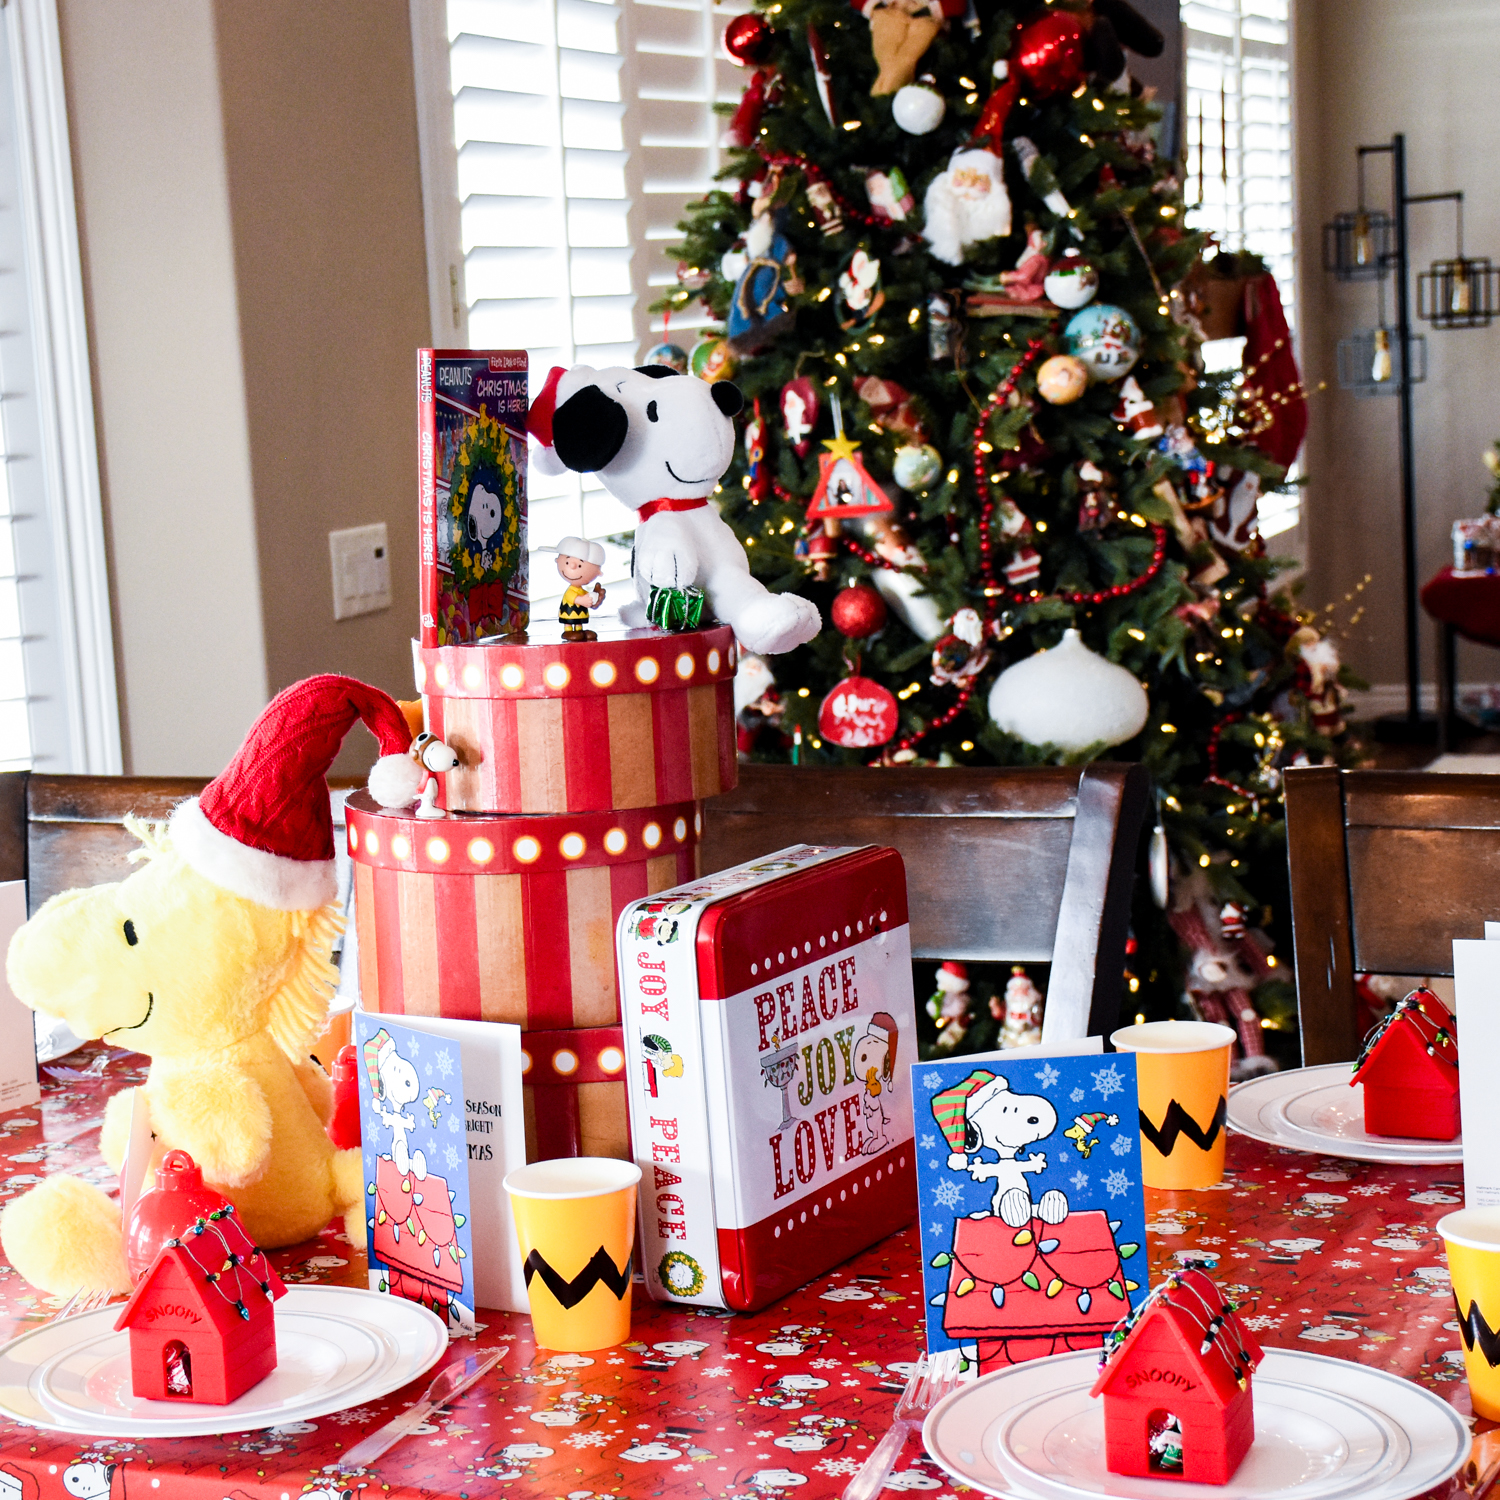 Christmas Tablescape: Snoopy from Peanuts